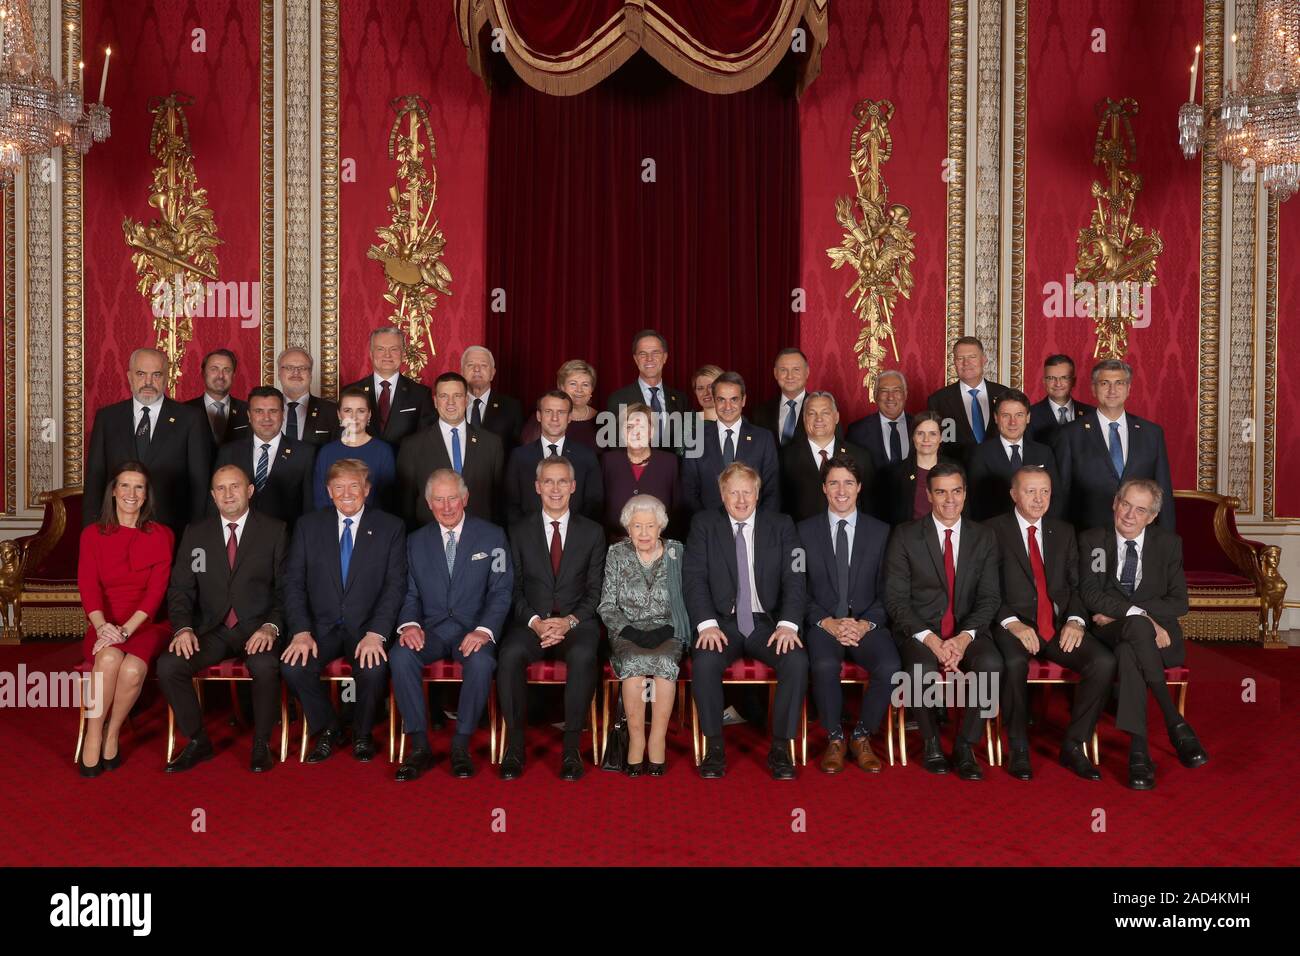 Leaders of Nato alliance countries, and its secretary general, join Queen Elizabeth II and the Prince of Wales for a group picture during a reception in Buckingham Palace, London, as they gathered to mark 70 years of the alliance. Back row, from left: Xavier Bettel, Prime Minister of Luxembourg; Egils Levits, President of Latvia; Gitanas Nauseda, President of Lithuania; Dusko Markovic, Prime Minister of Montenegro; Erna Solberg, Prime Minister of Norway; Mark Rutte, Prime Minister of Netherlands; Zuzana Caputova, President of Slovakia; Andrzej Duda, President of Poland; Antonio Costa, Prime Mi Stock Photo